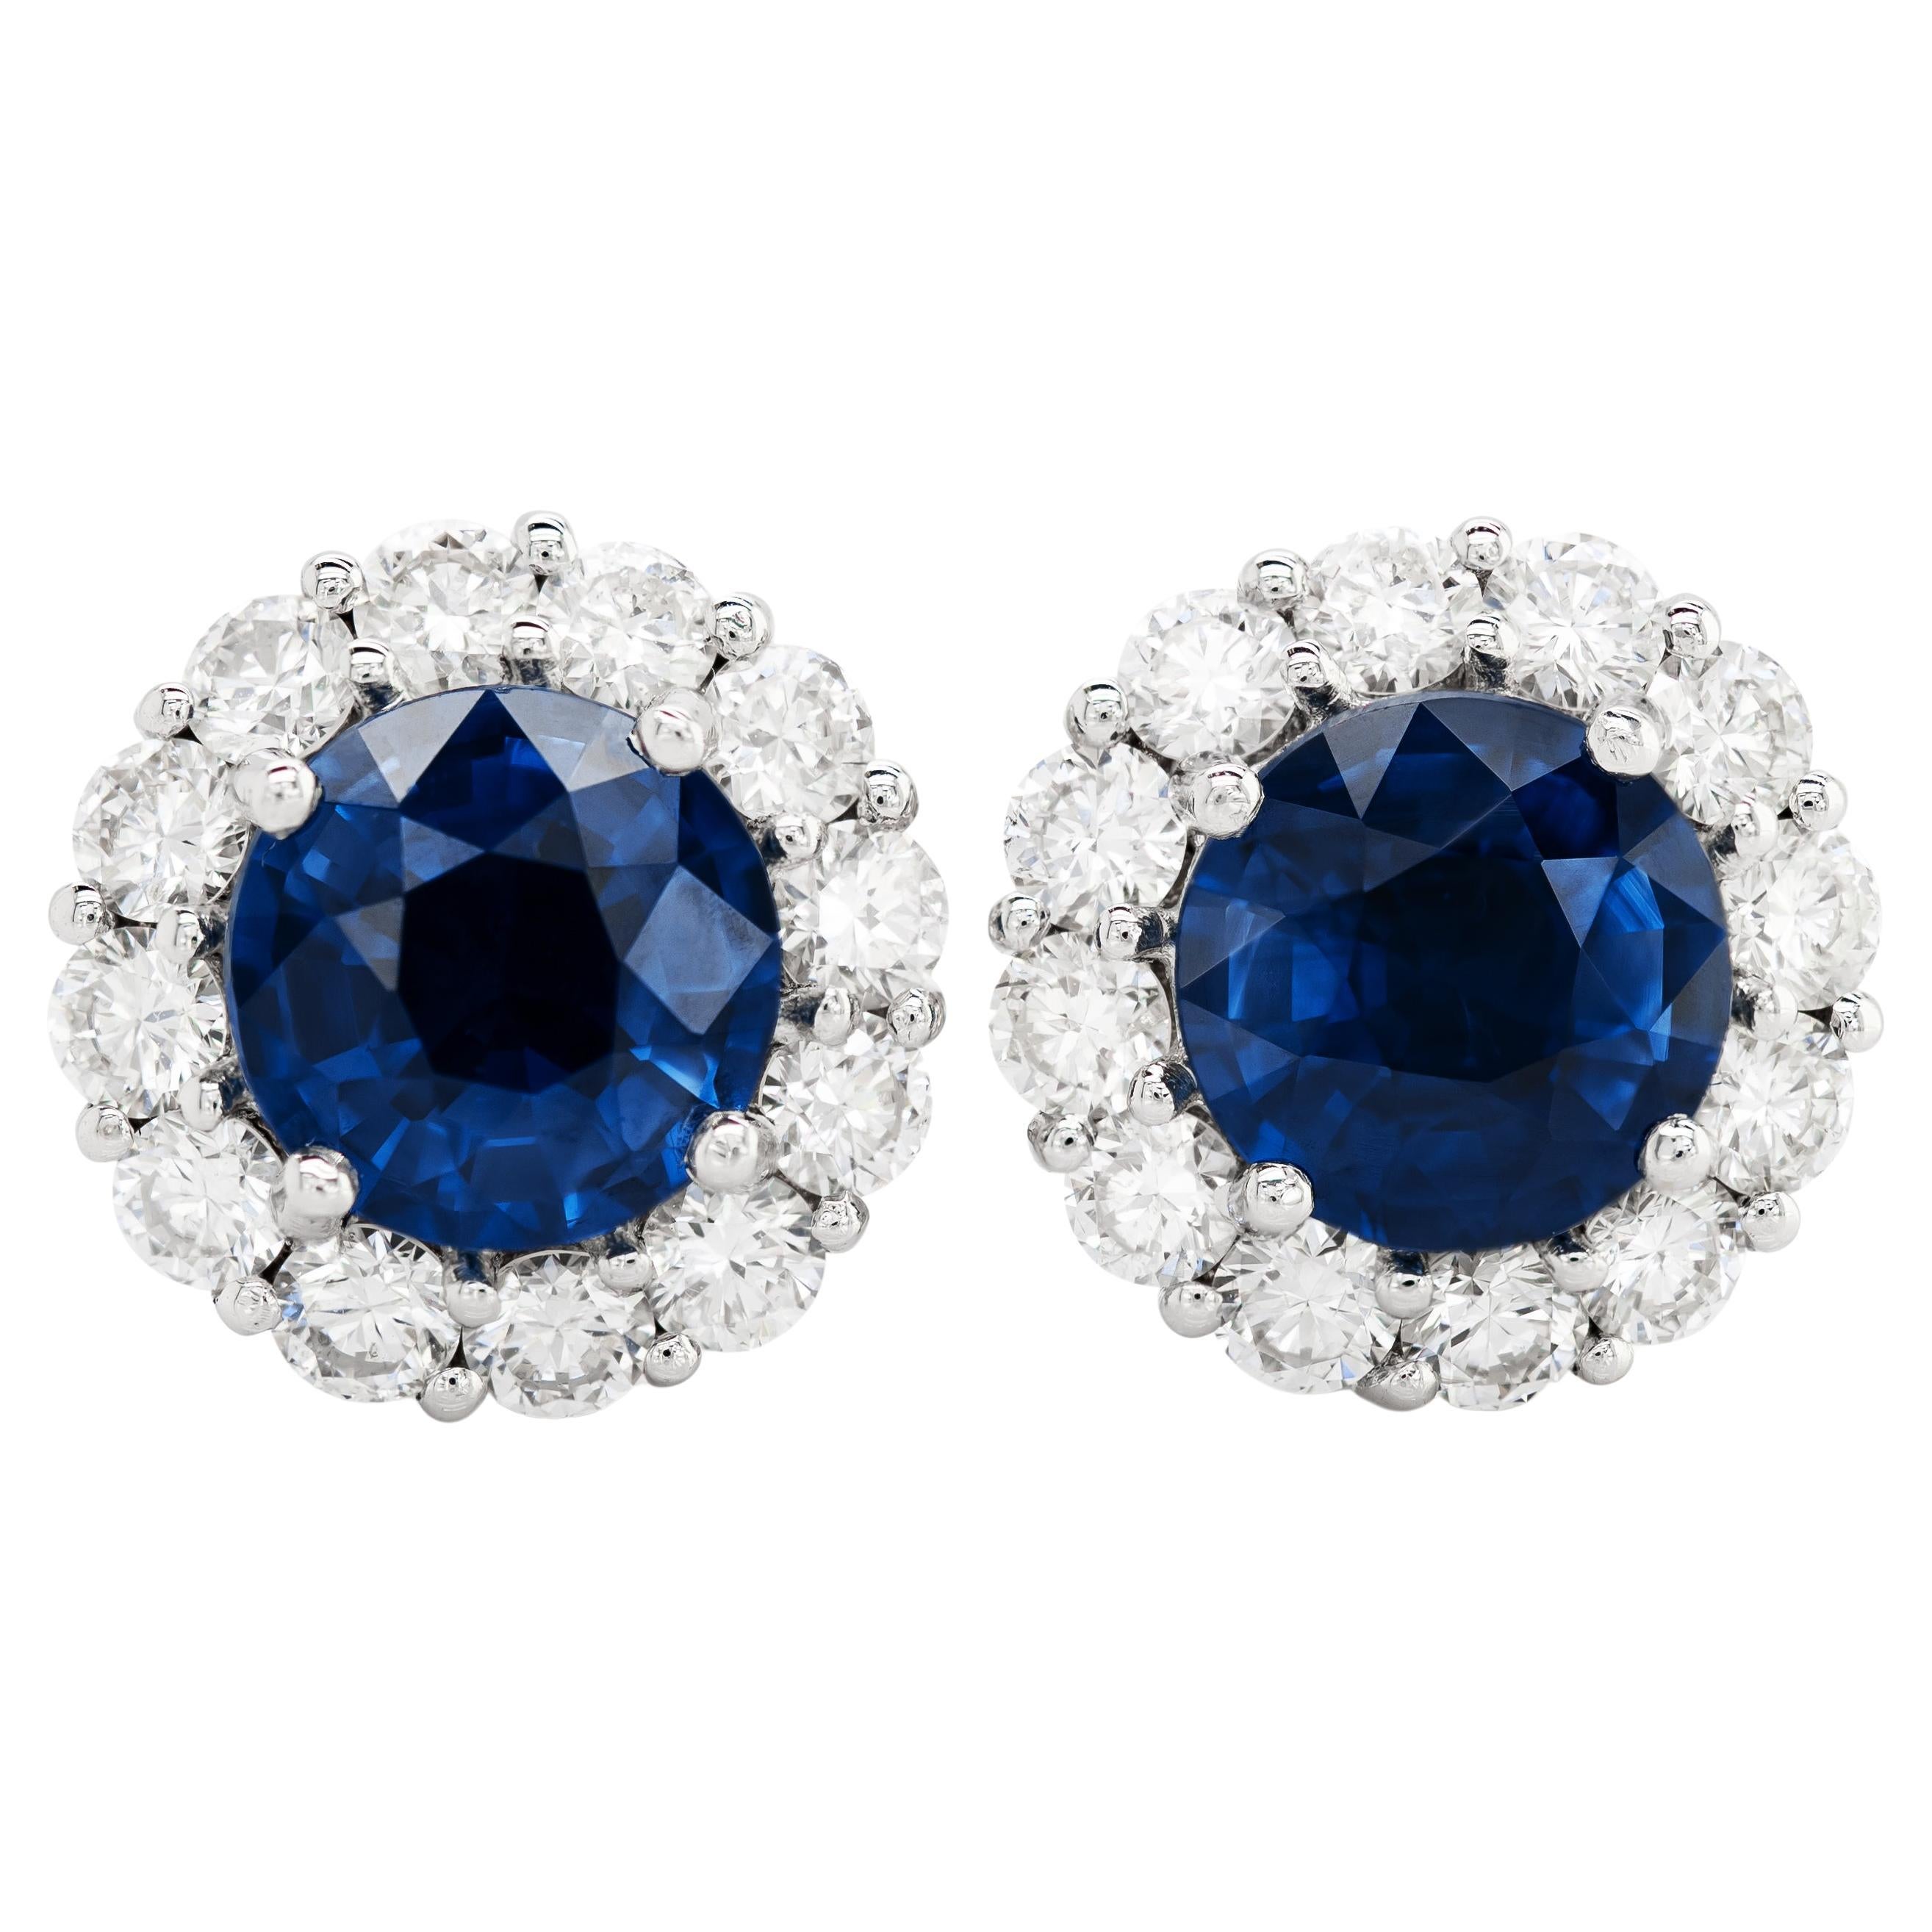 Natural Blue Sapphires 2.60 Carats  set in 18K White Gold Earrings with Diamonds